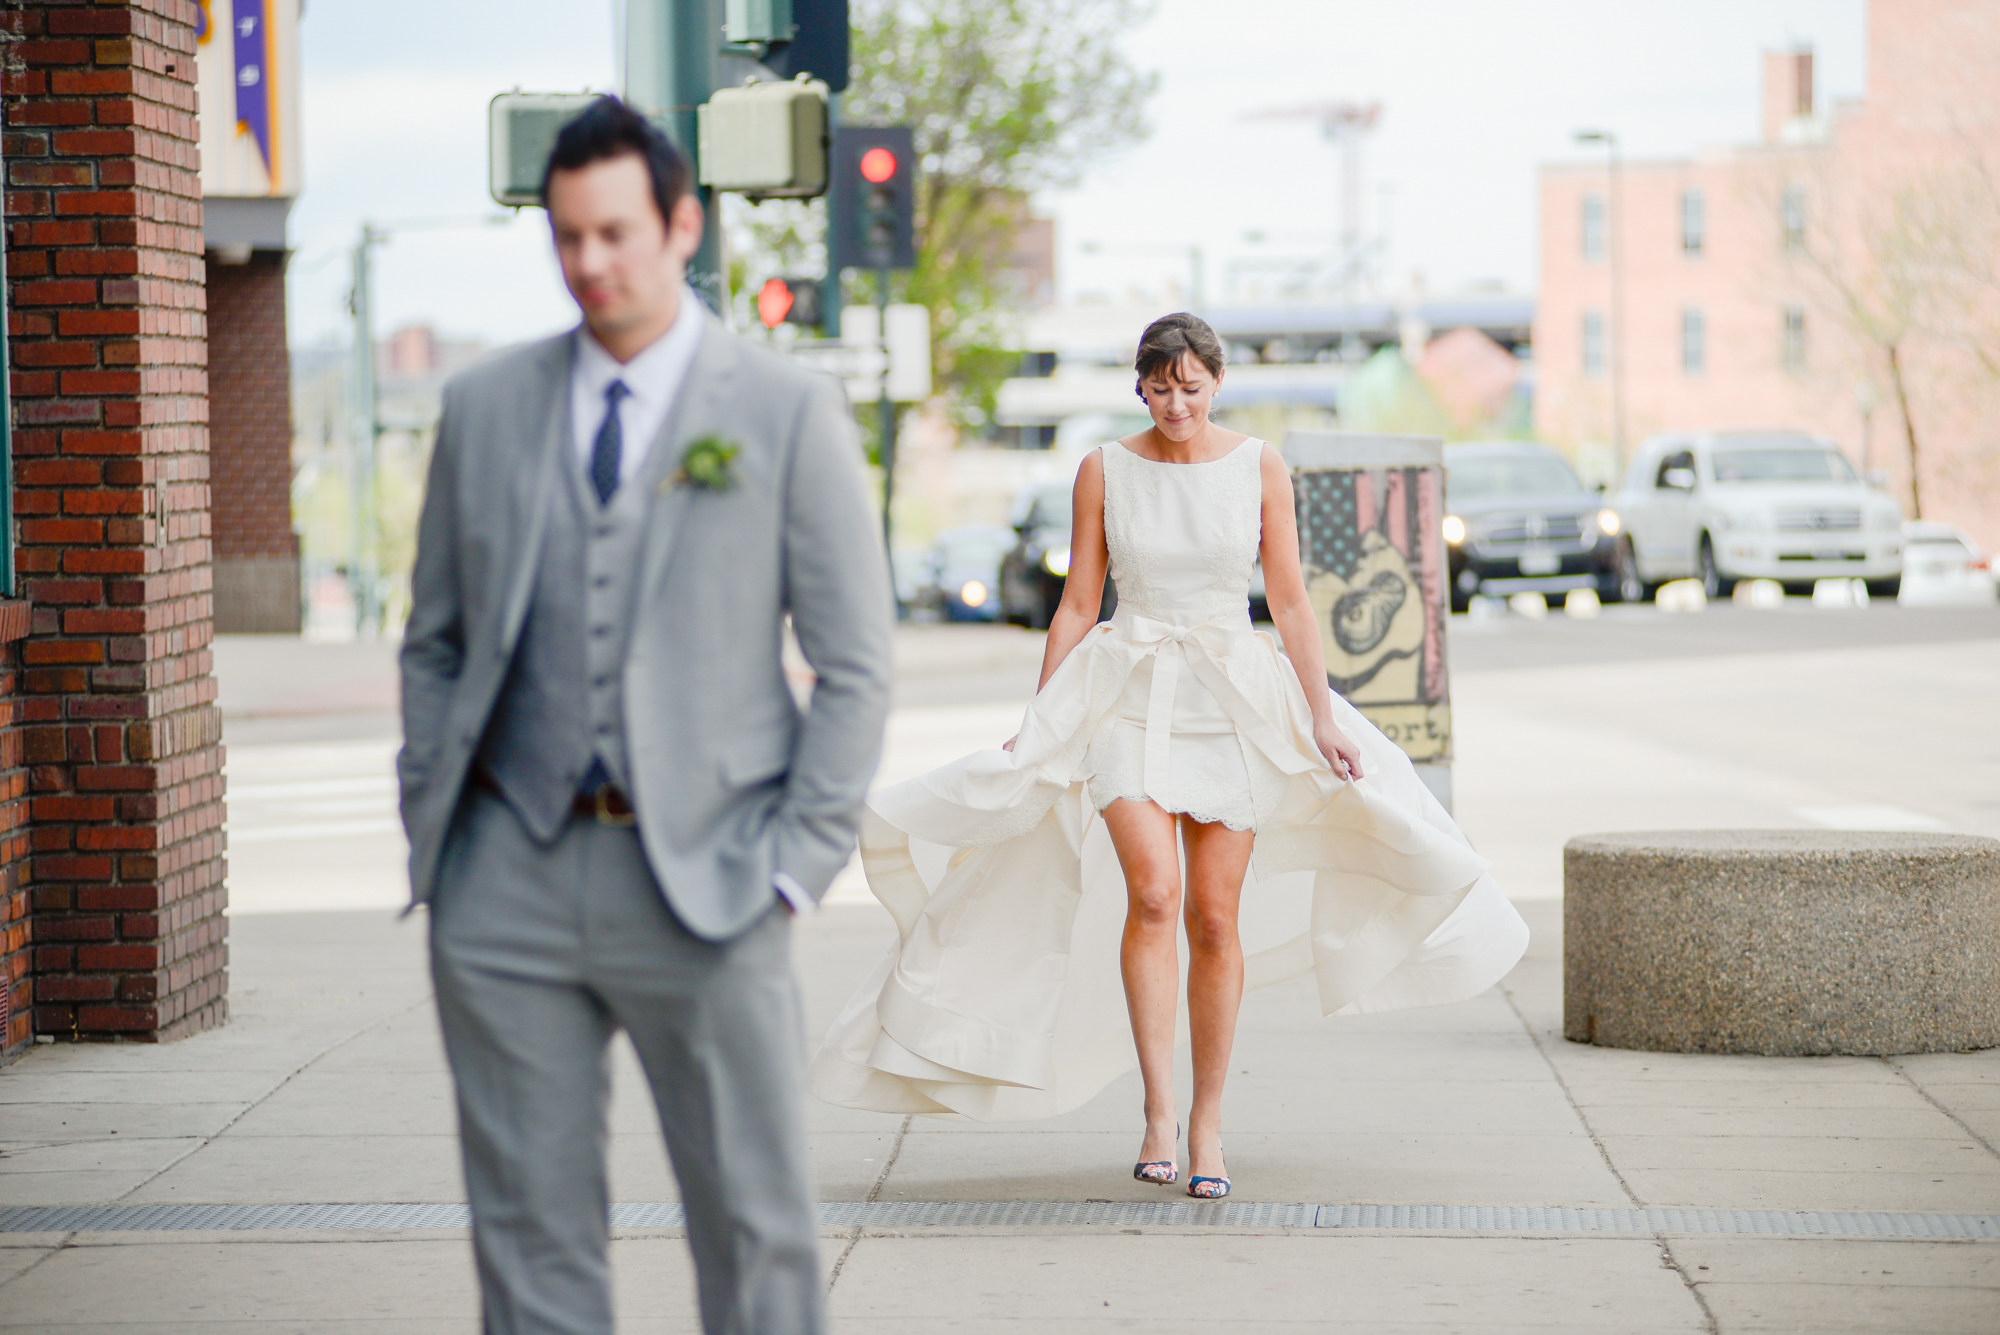  Cara + Evan | Anne Barge "Jenny" available at Little White Dress Bridal shop in Denver |&nbsp; Elevate Photography  